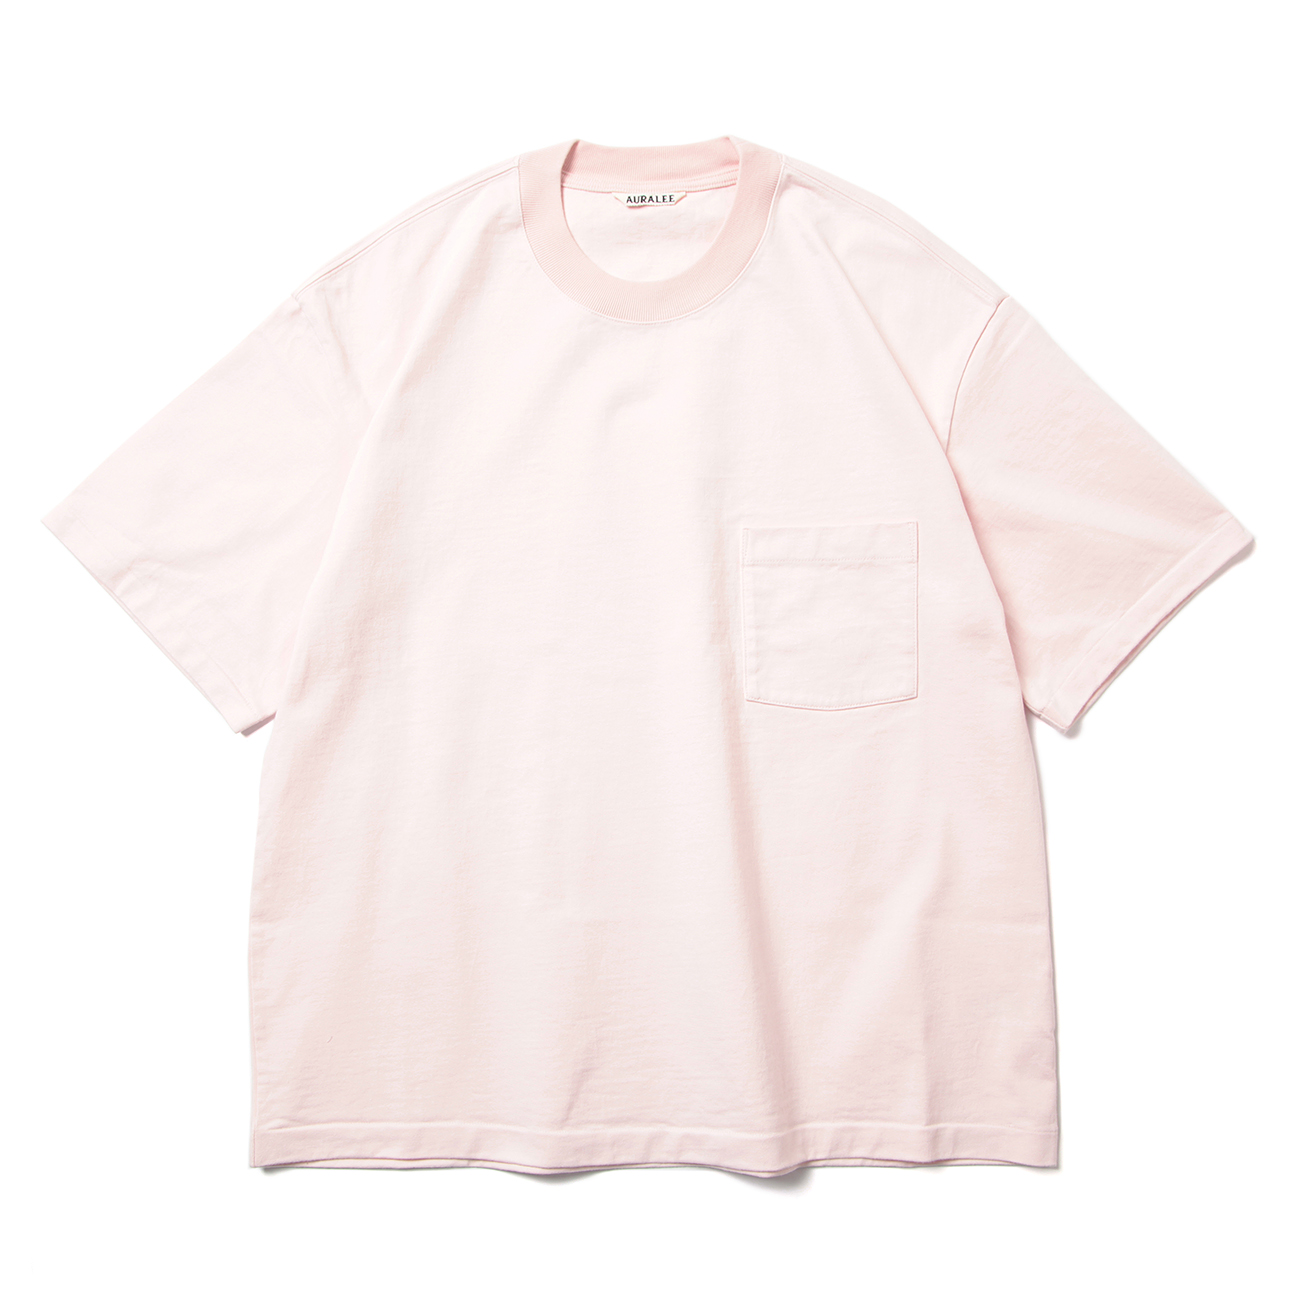 STAND-UP TEE (メンズ) - Light Pink